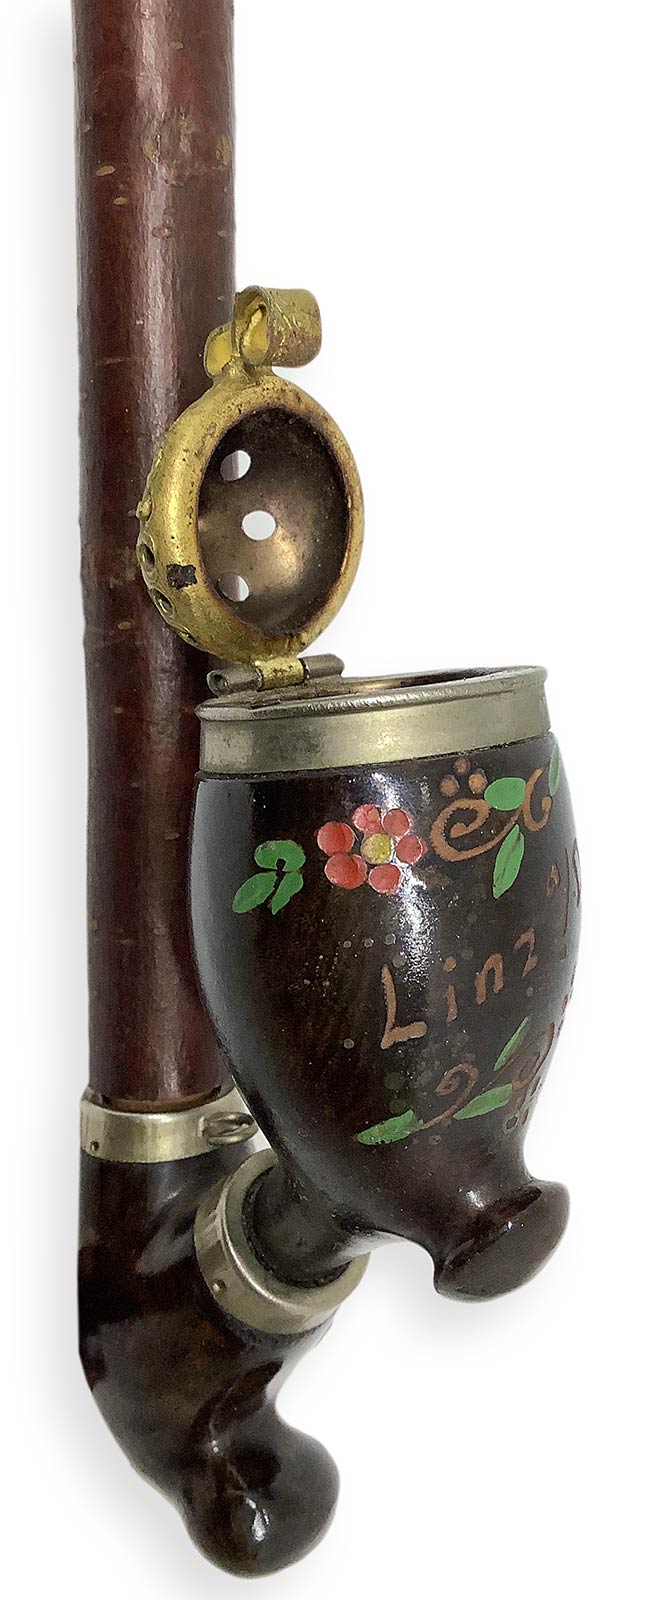 Walking pipe with Flowers - Linz, Germany. Early 1900s. Long walking pipe with briarwood tobacco - Image 5 of 6